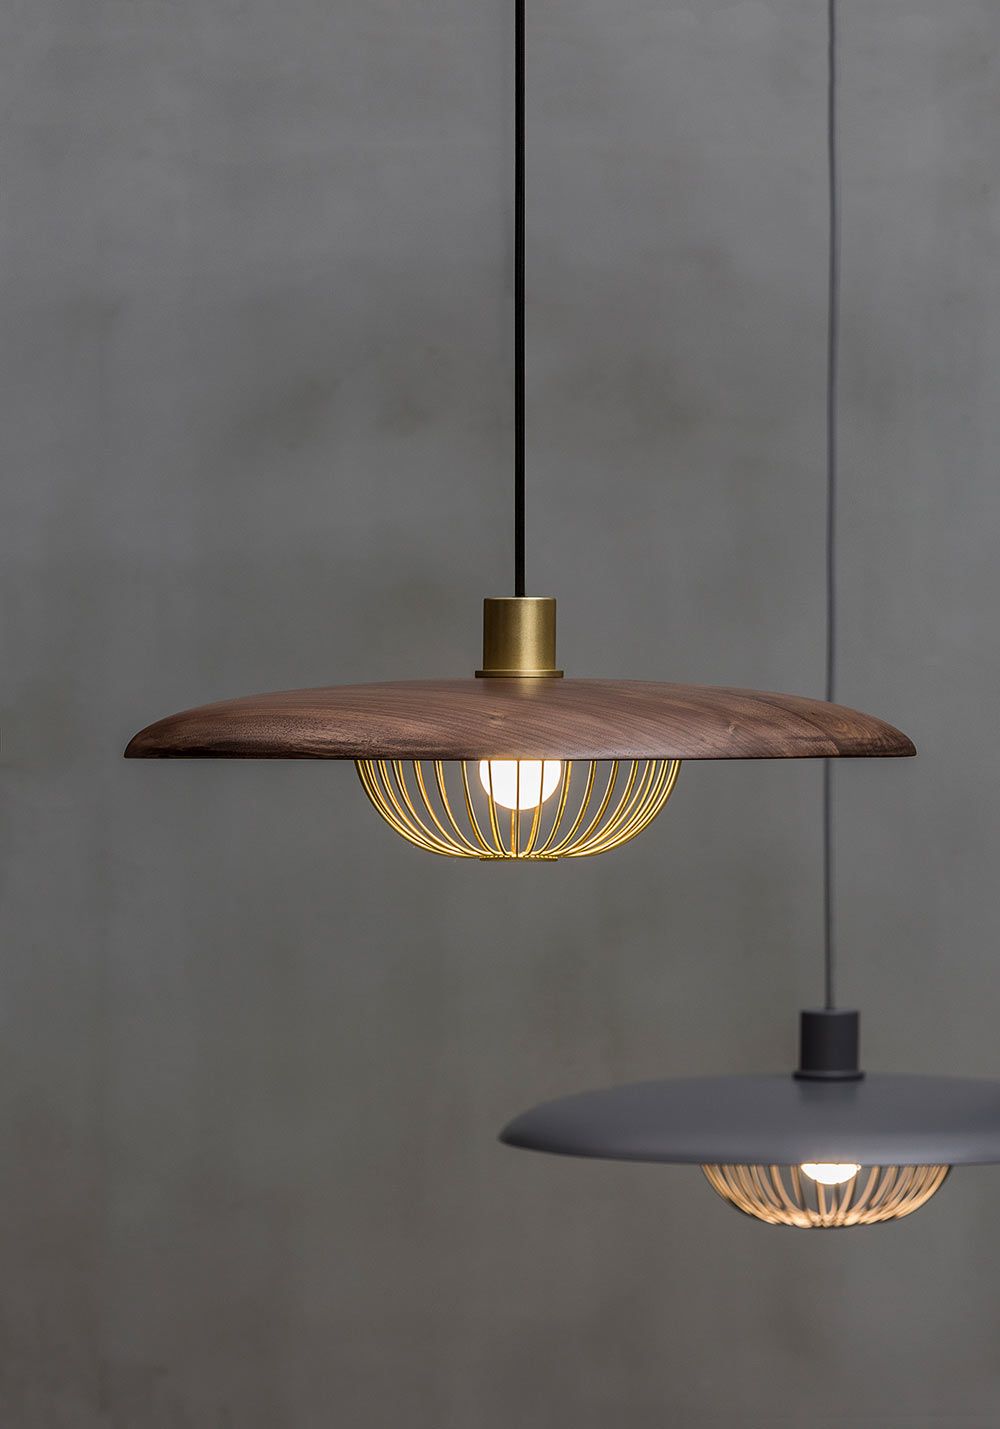 Make a Statement with Designer Pendants: Trends and Tips